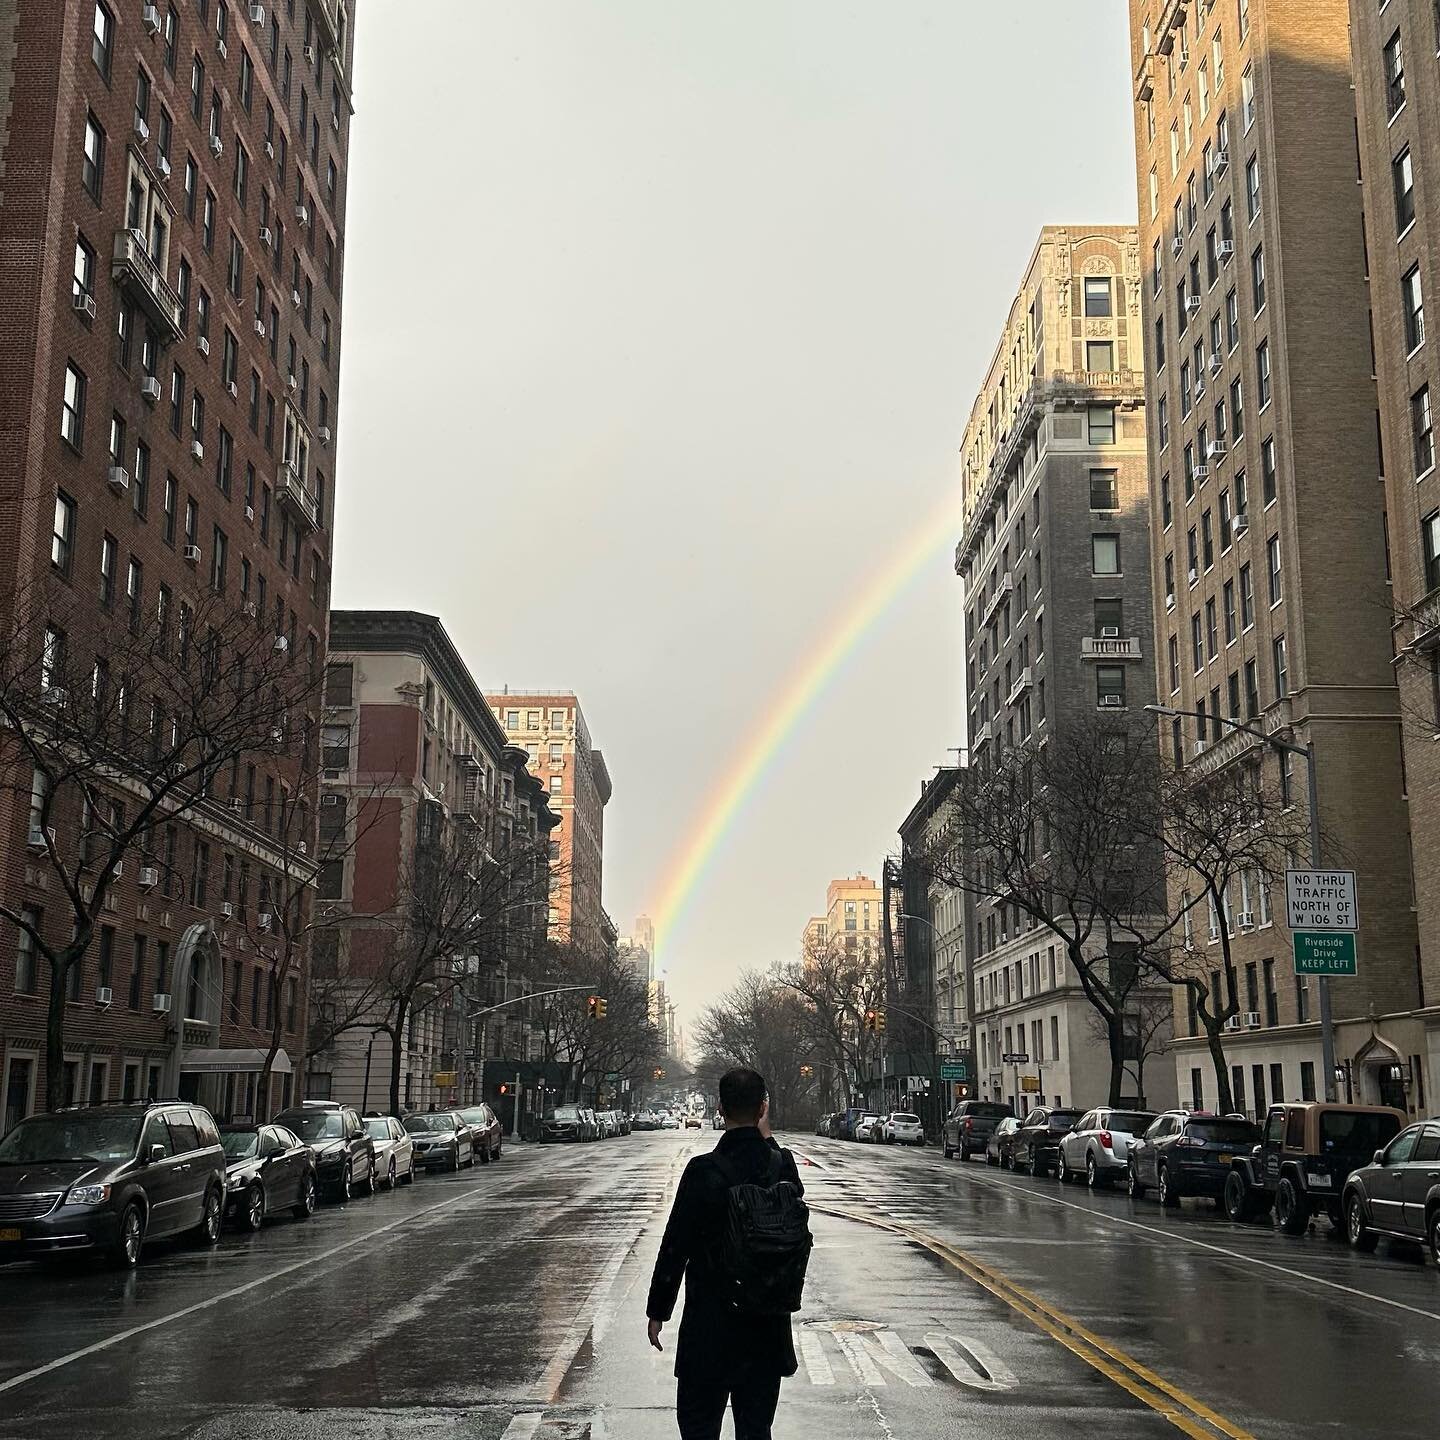 Talk about a perfect photo opportunity. 

Shoutout to Timmy, the complete stranger in this pic who said &ldquo;My mom will love this!&rdquo; when I sent him this pic . ☀️☔️🌈🌇

#rainbow #newyorkcity #NYC